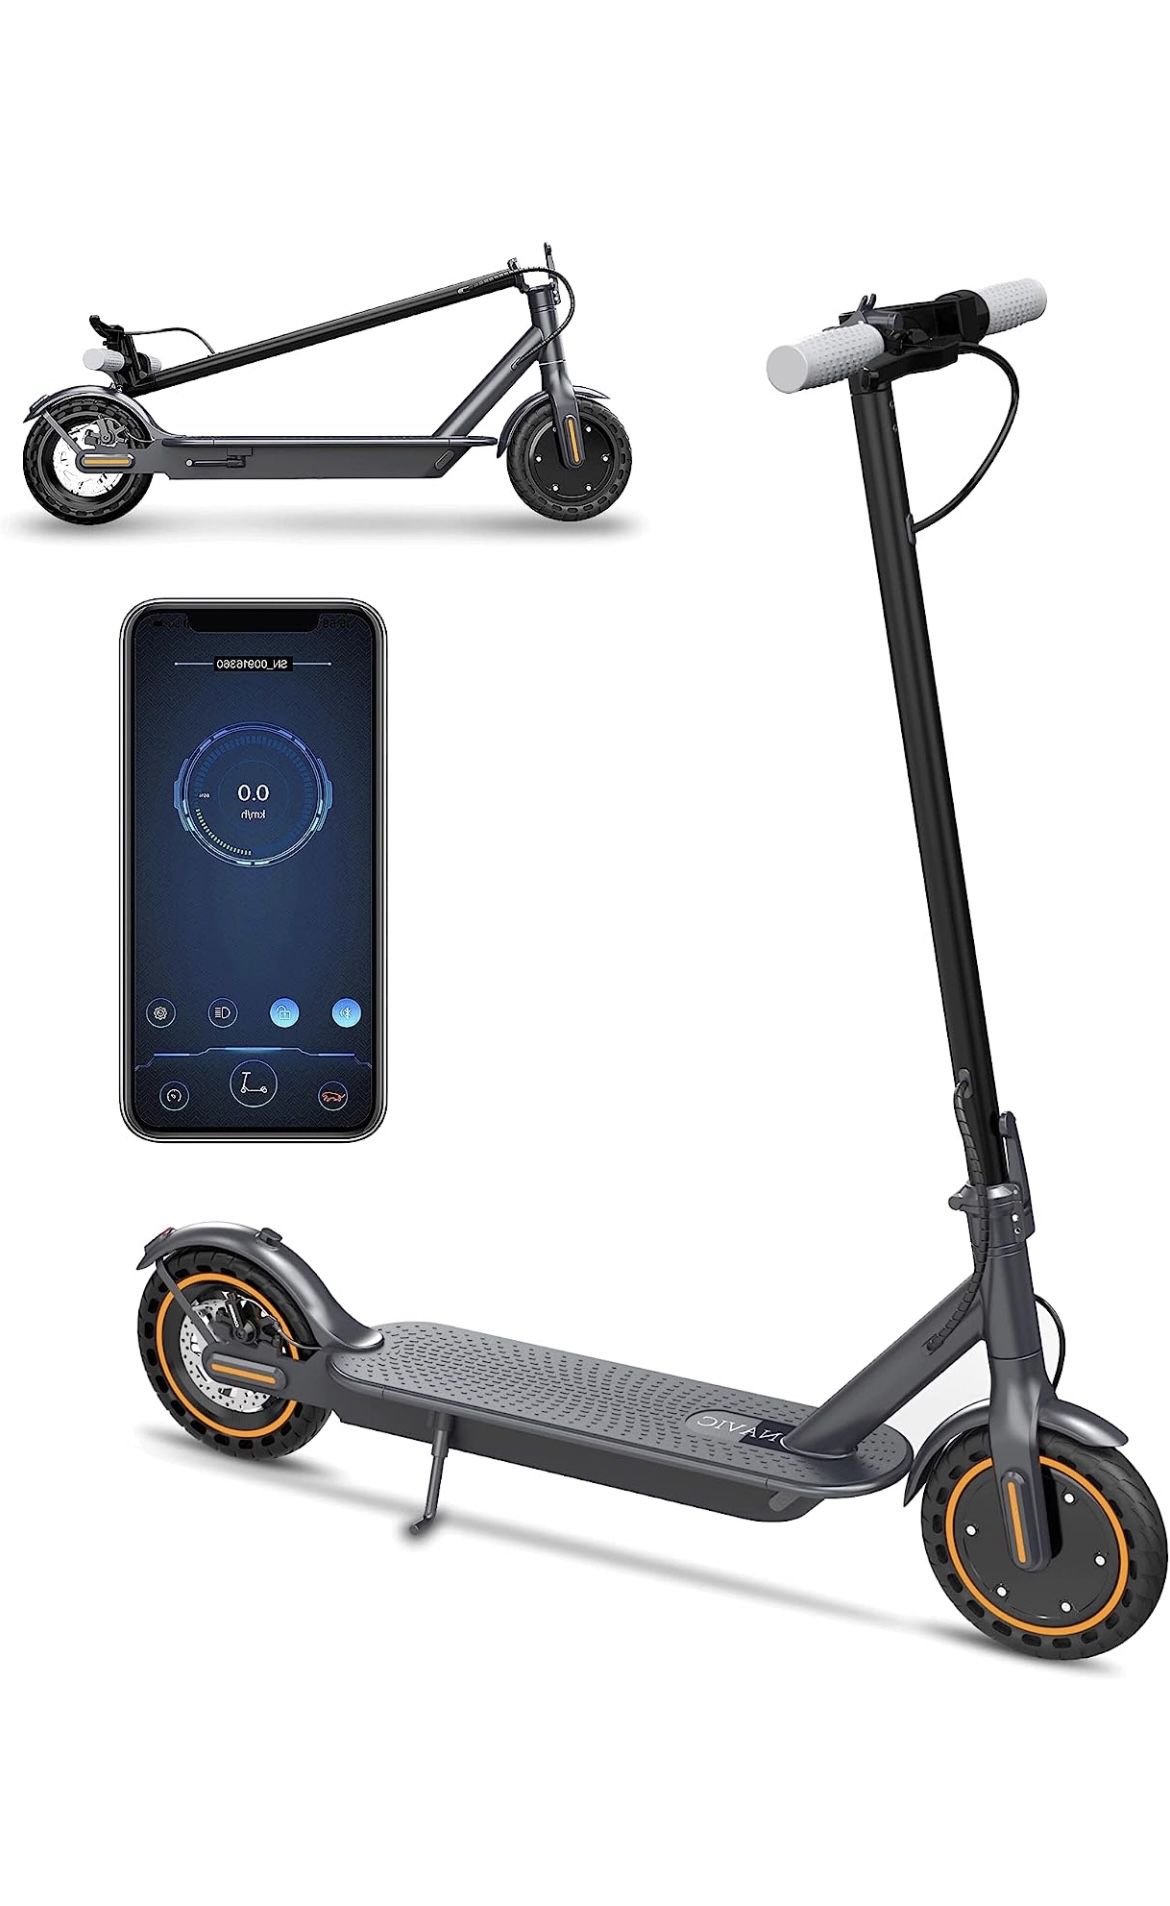 Electric Scooter - 8.5" Solid Tires, Quadruple Shock Absorption, Up to 19 Miles Long-Range, 19 Mph Top Speed, Portable Folding Commuting Scooter for A